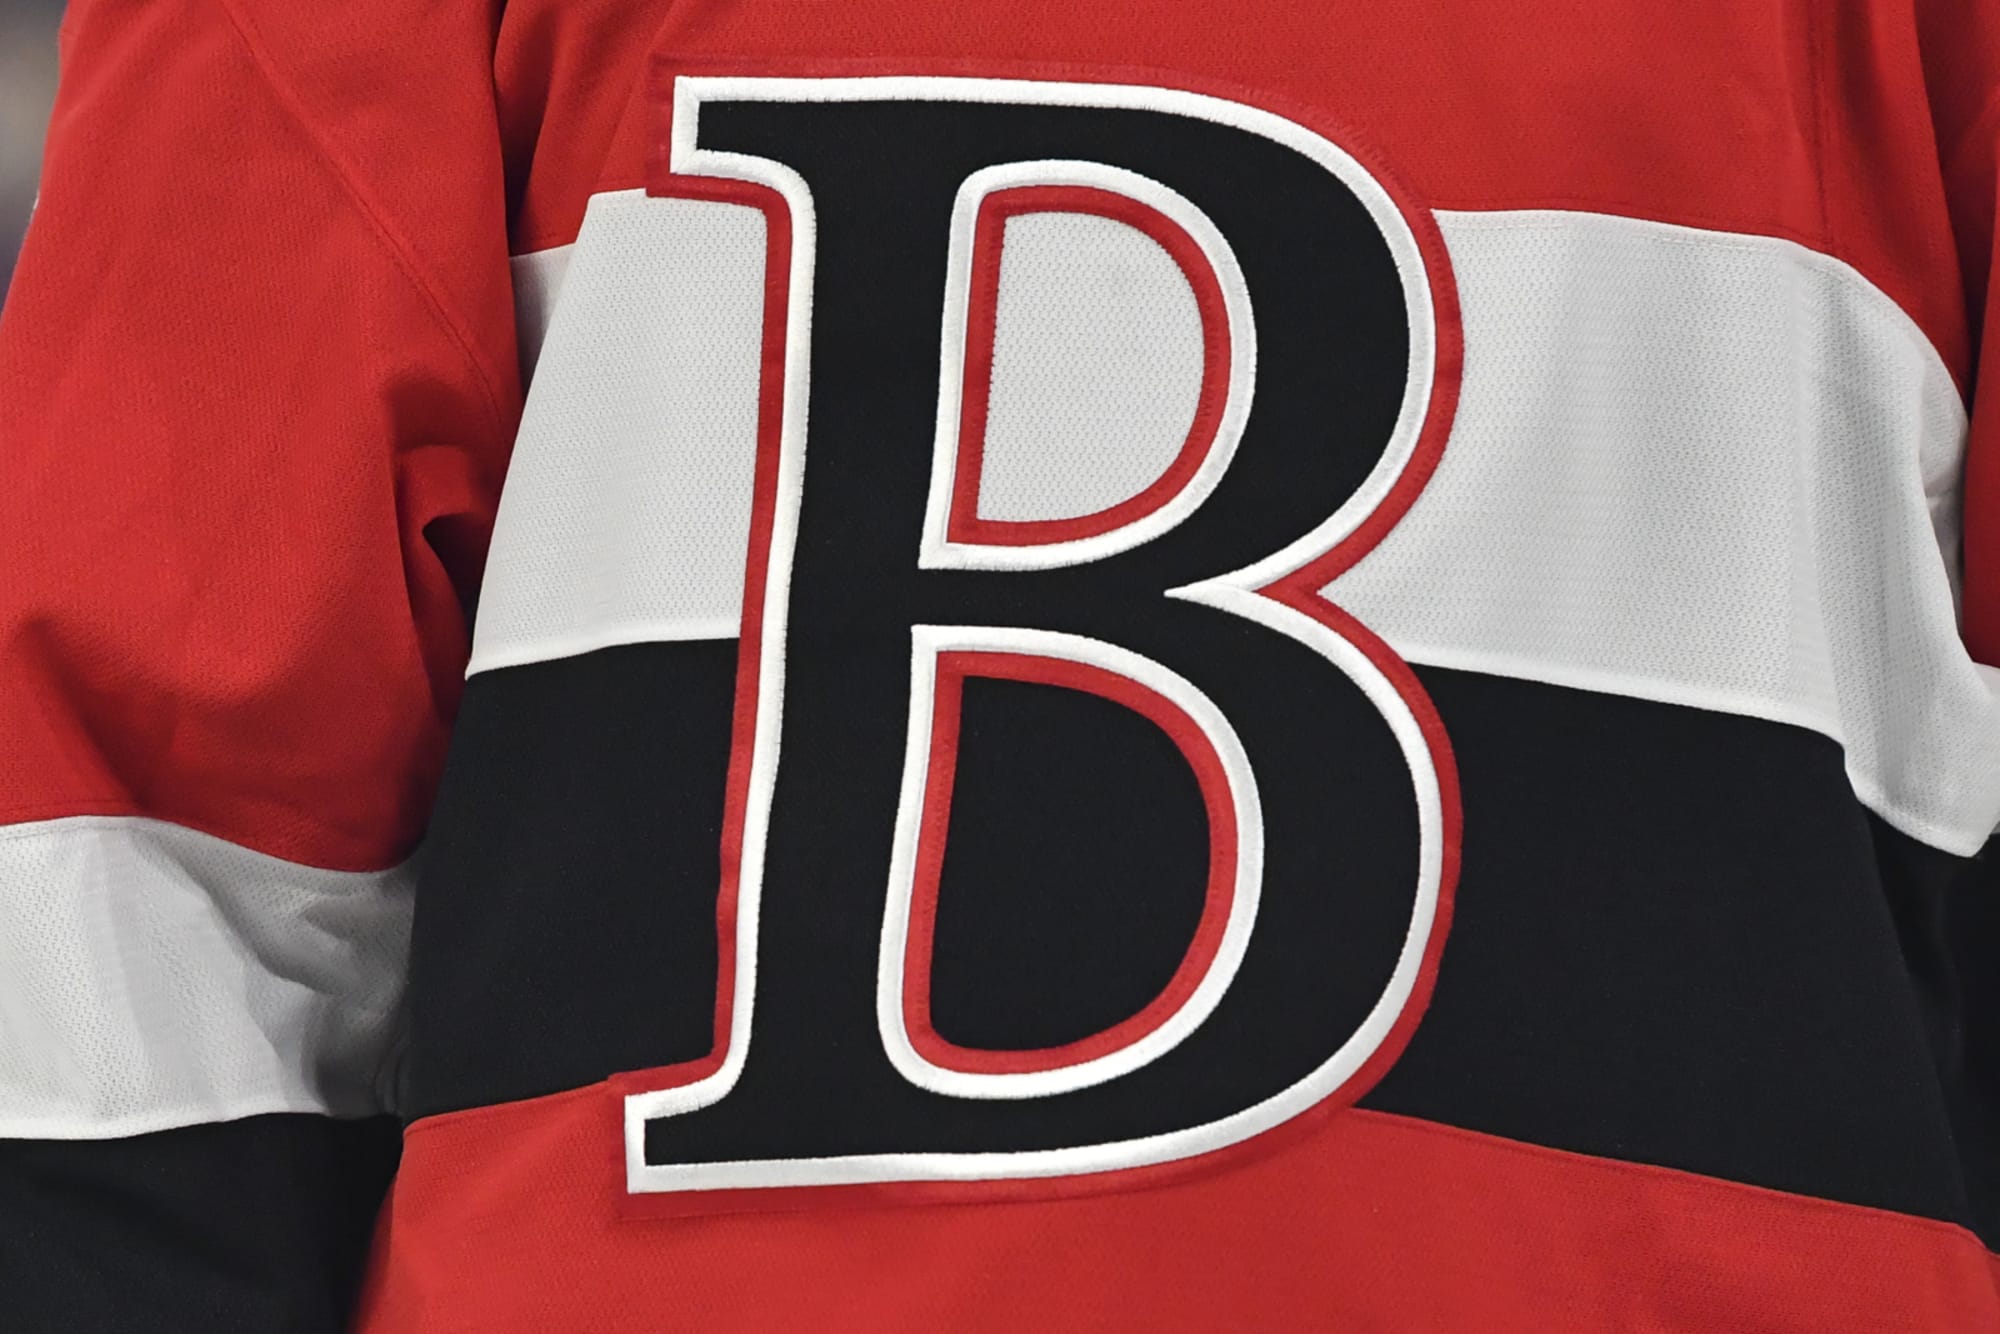 Belleville Senators: David Bell Officially Appointed as Head Coach